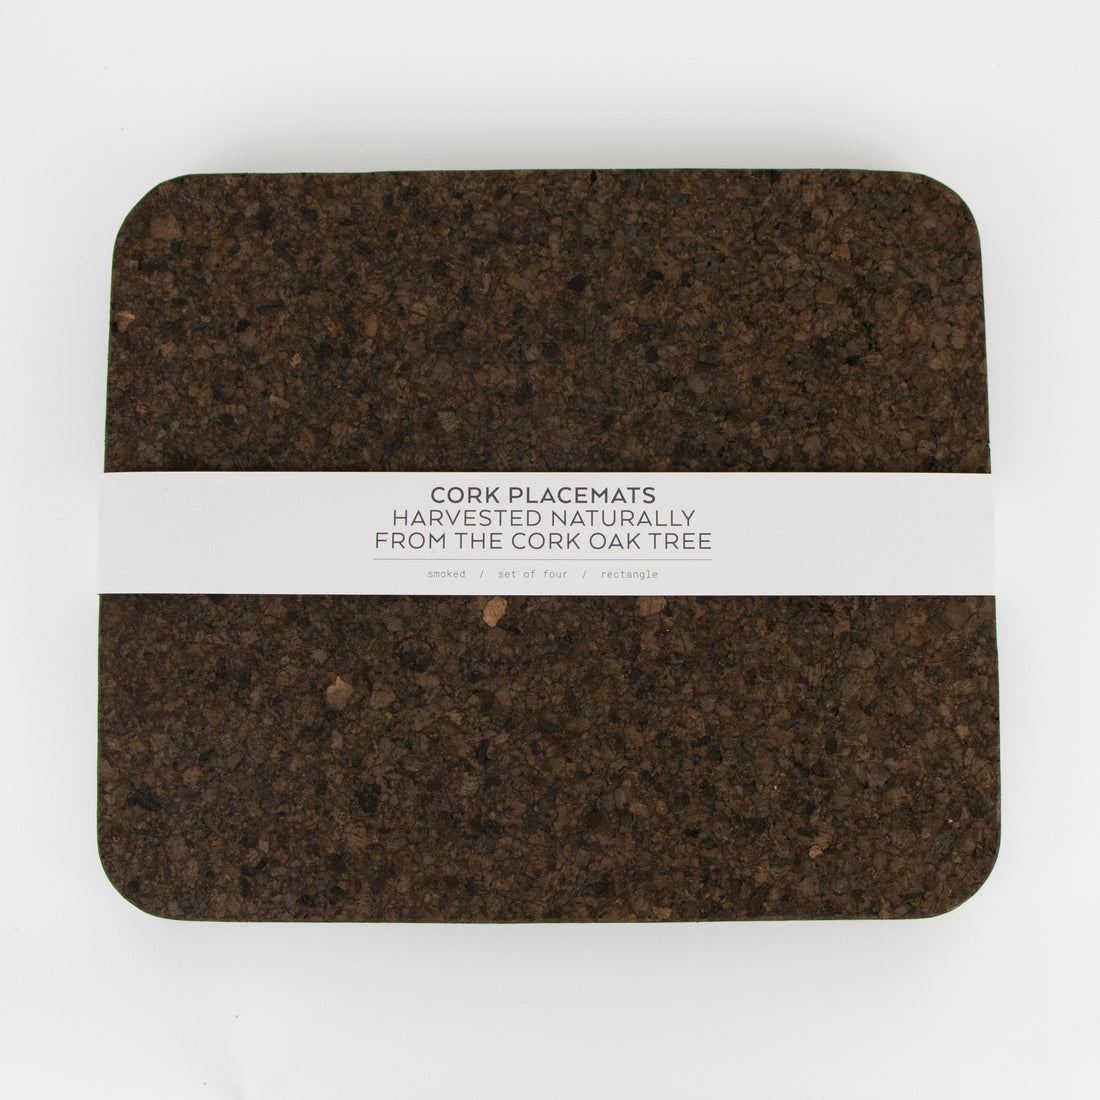 Smoked cork rectangle placemats on table